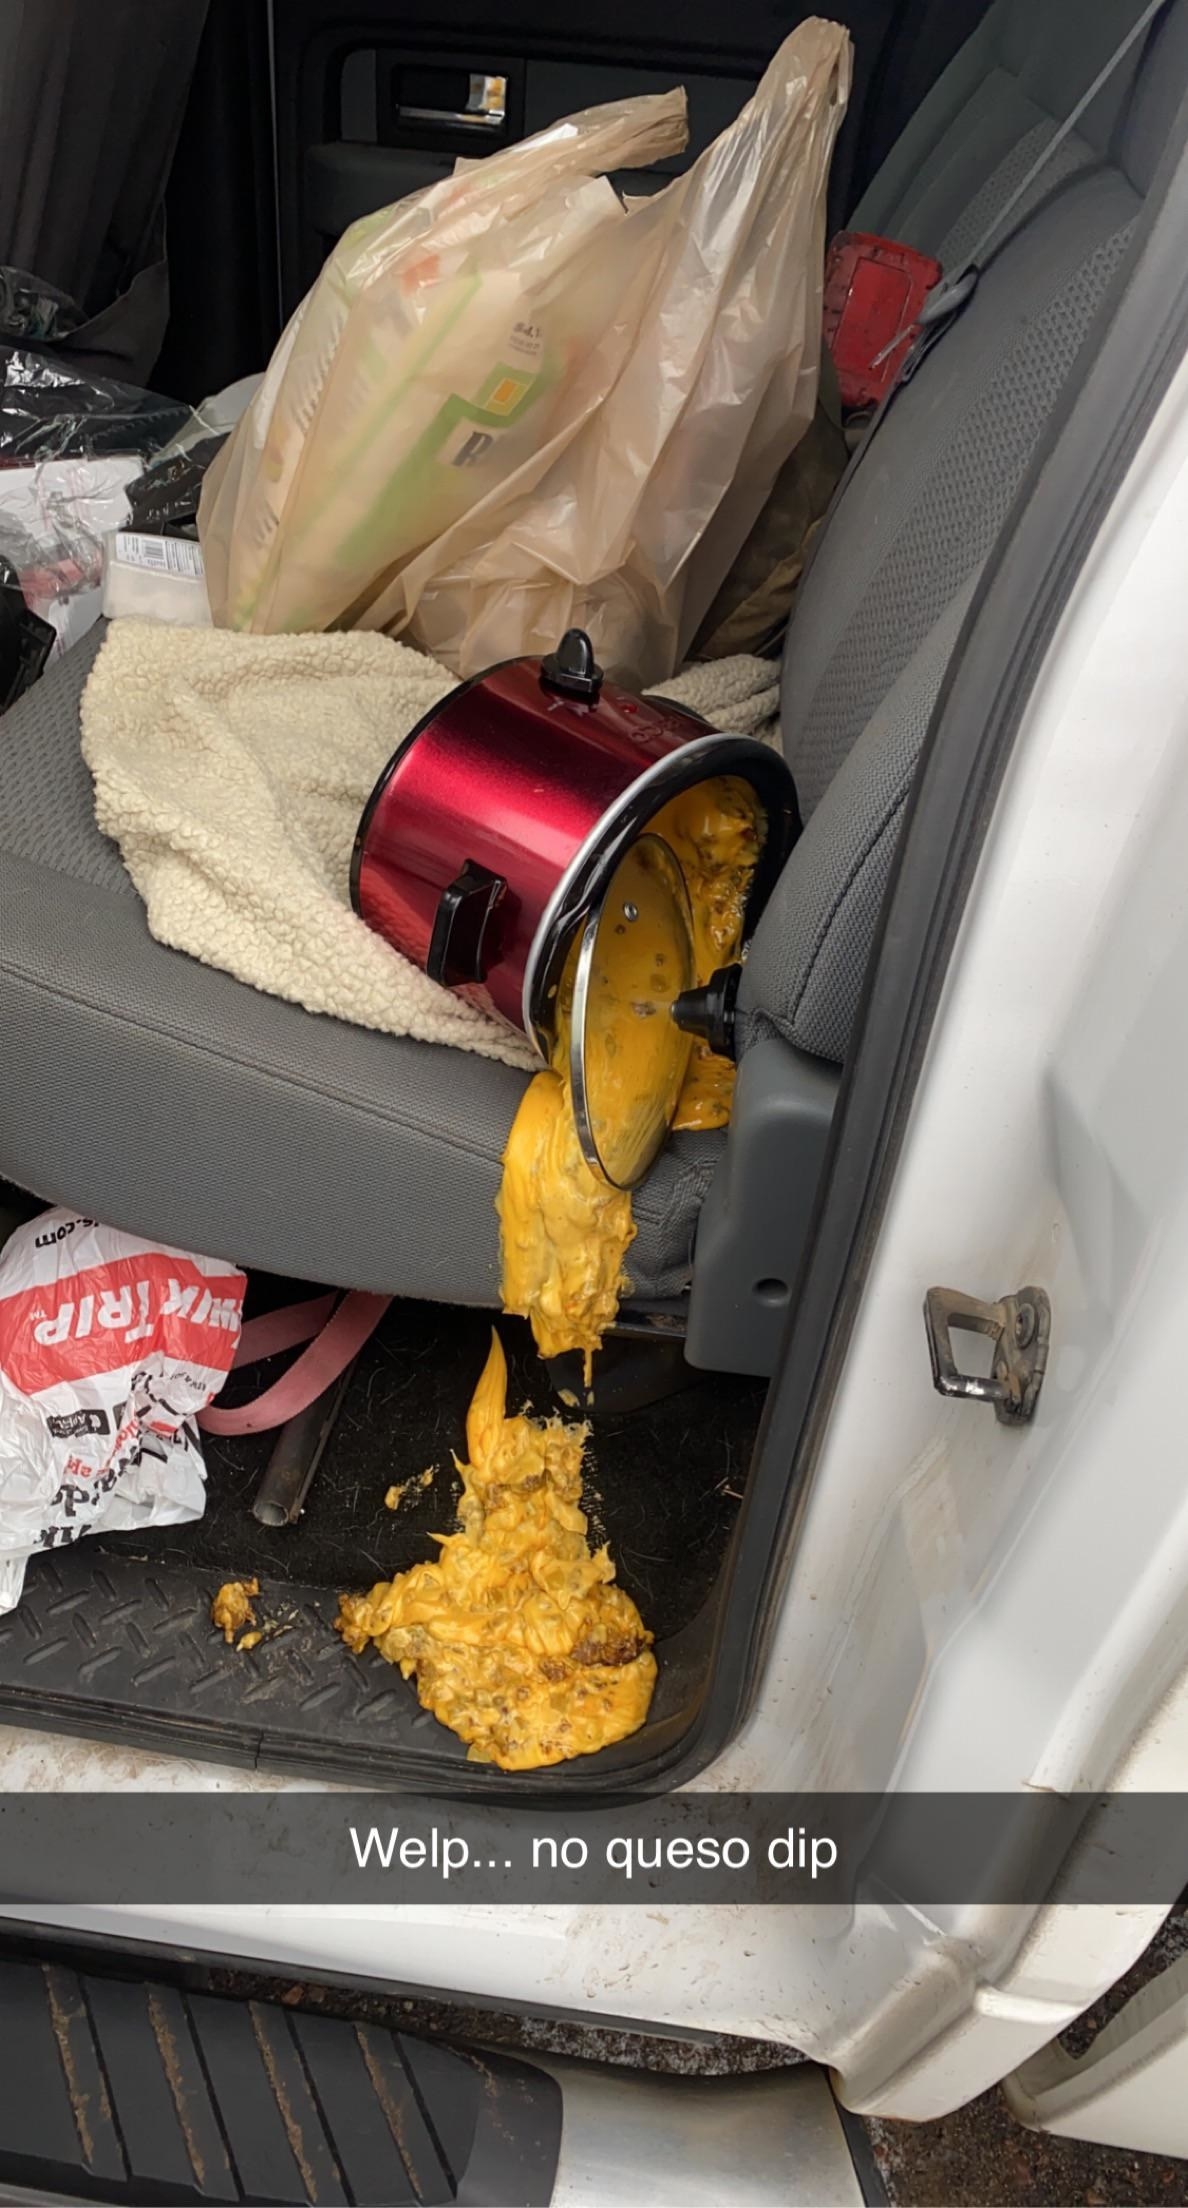 queso dip spilled in a car